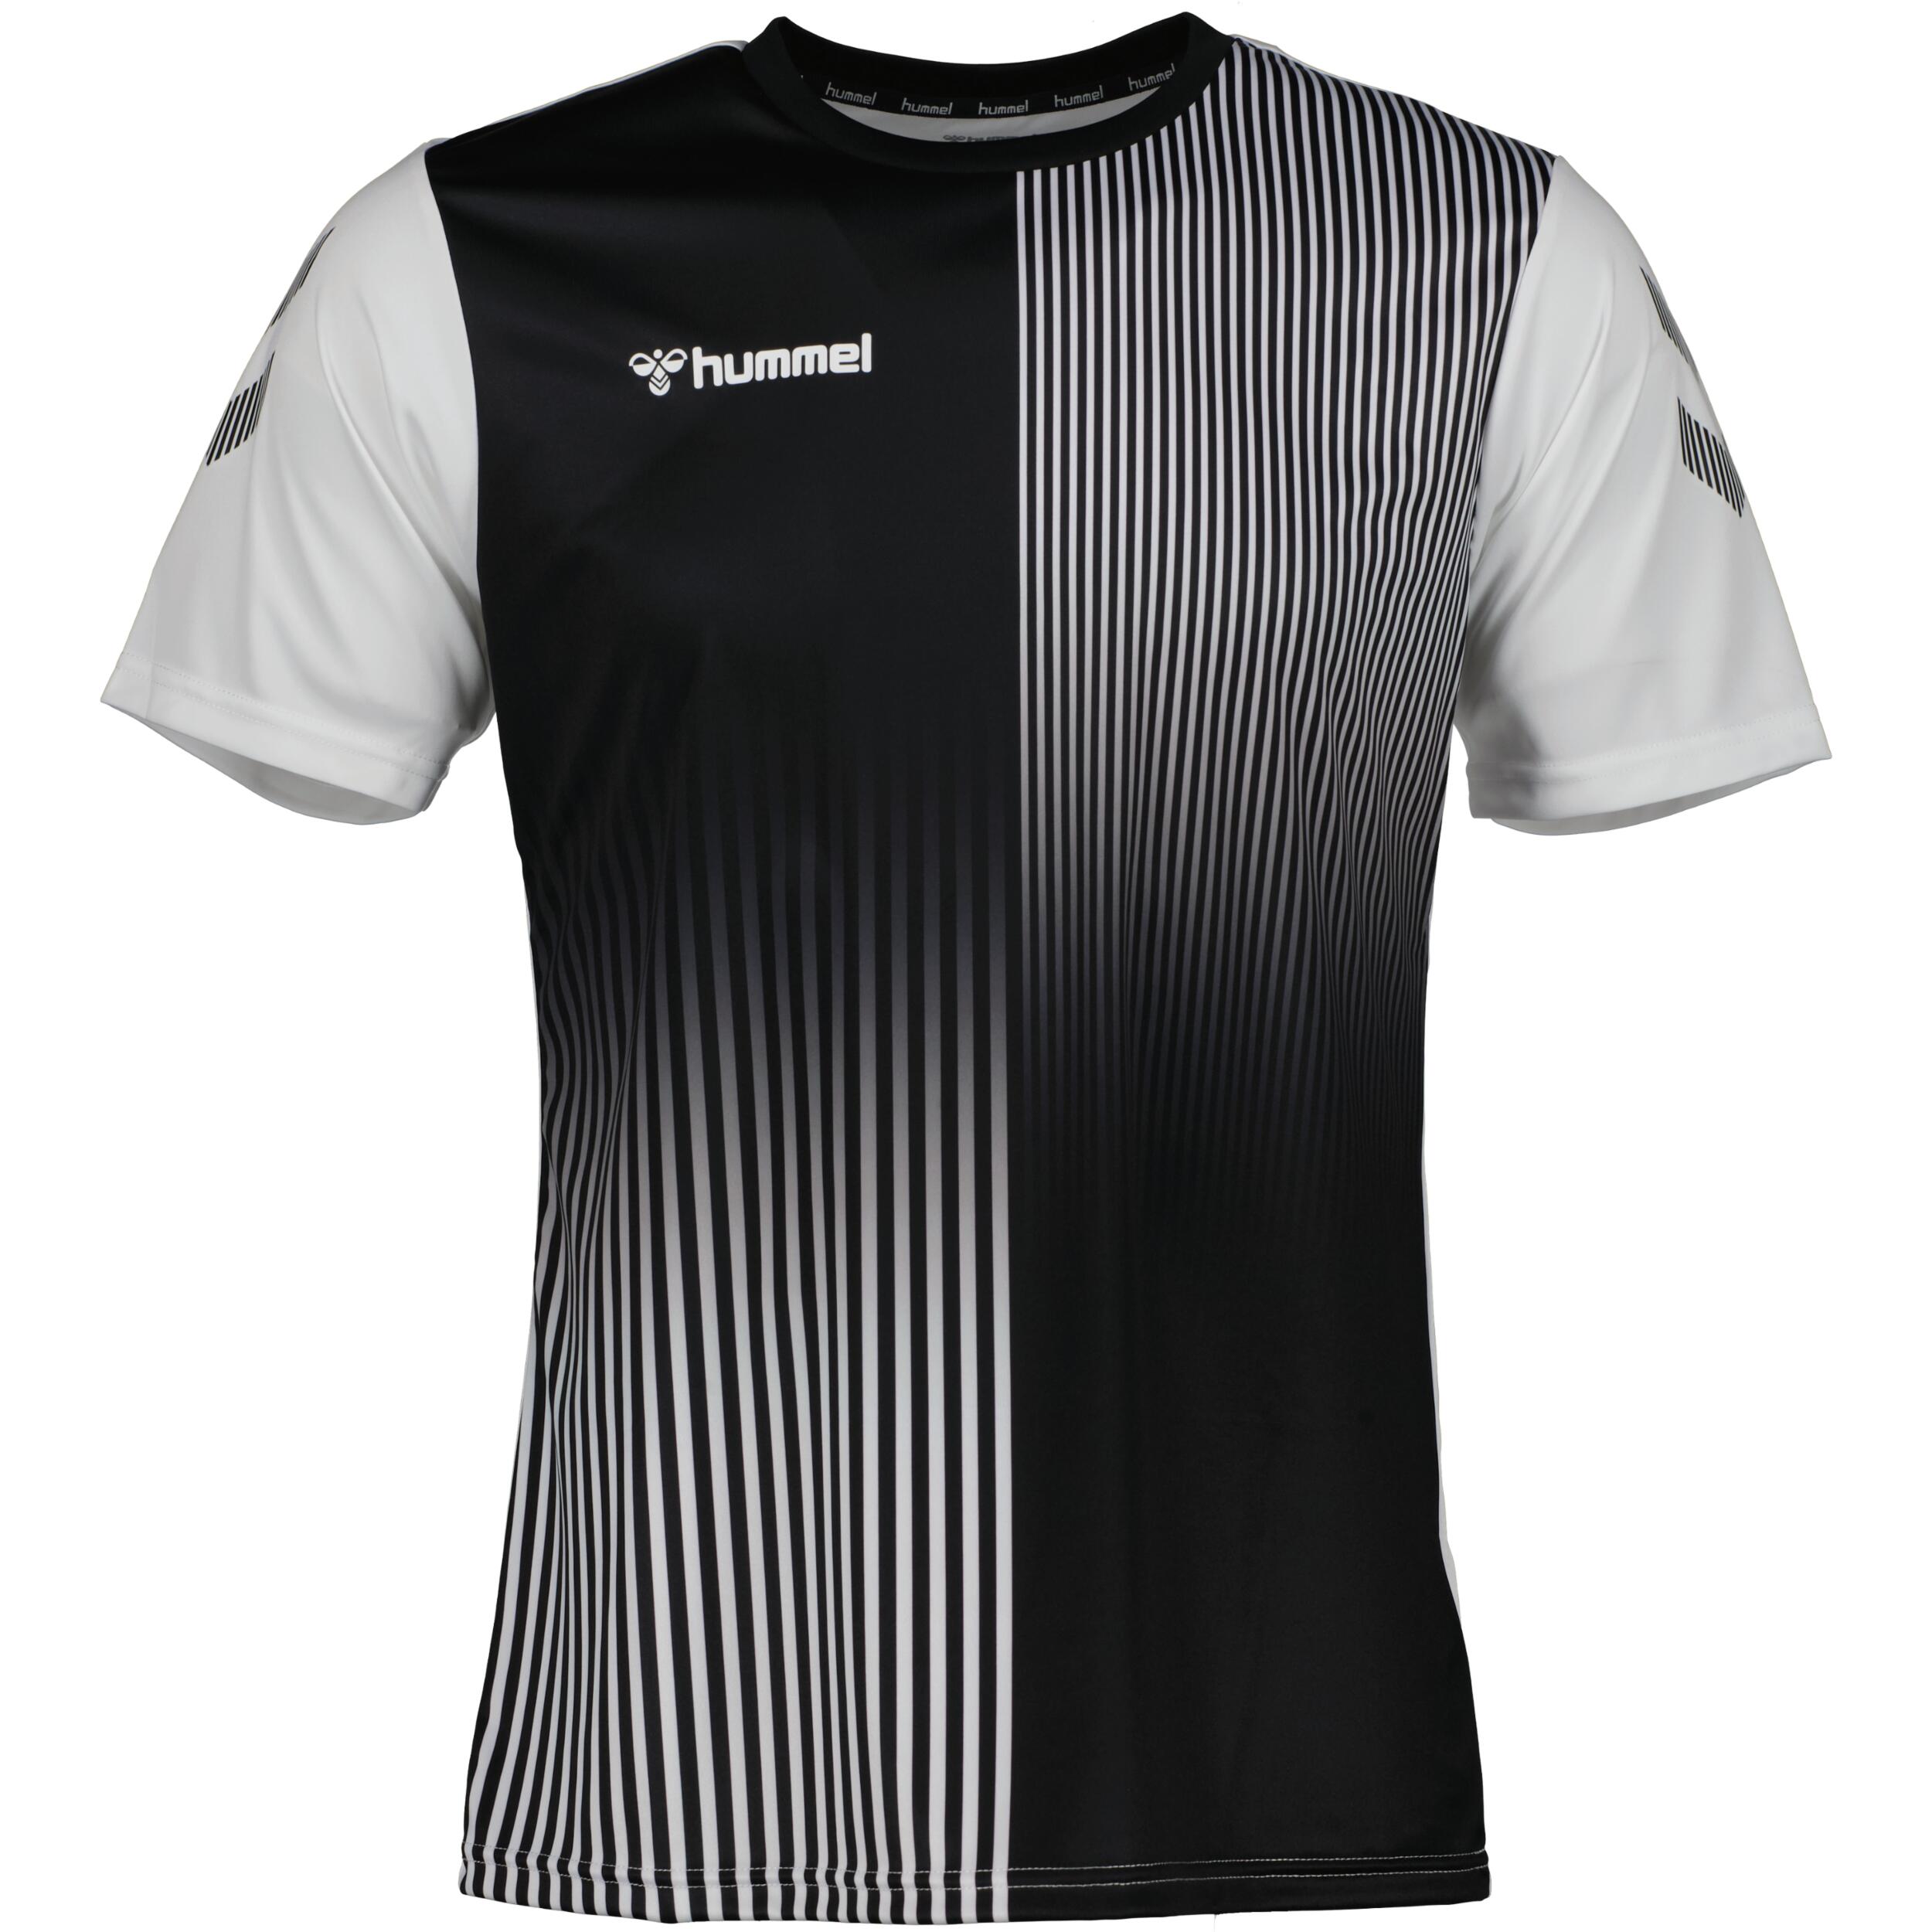 HUMMEL Mexico jersey for men, great for football, in black/white